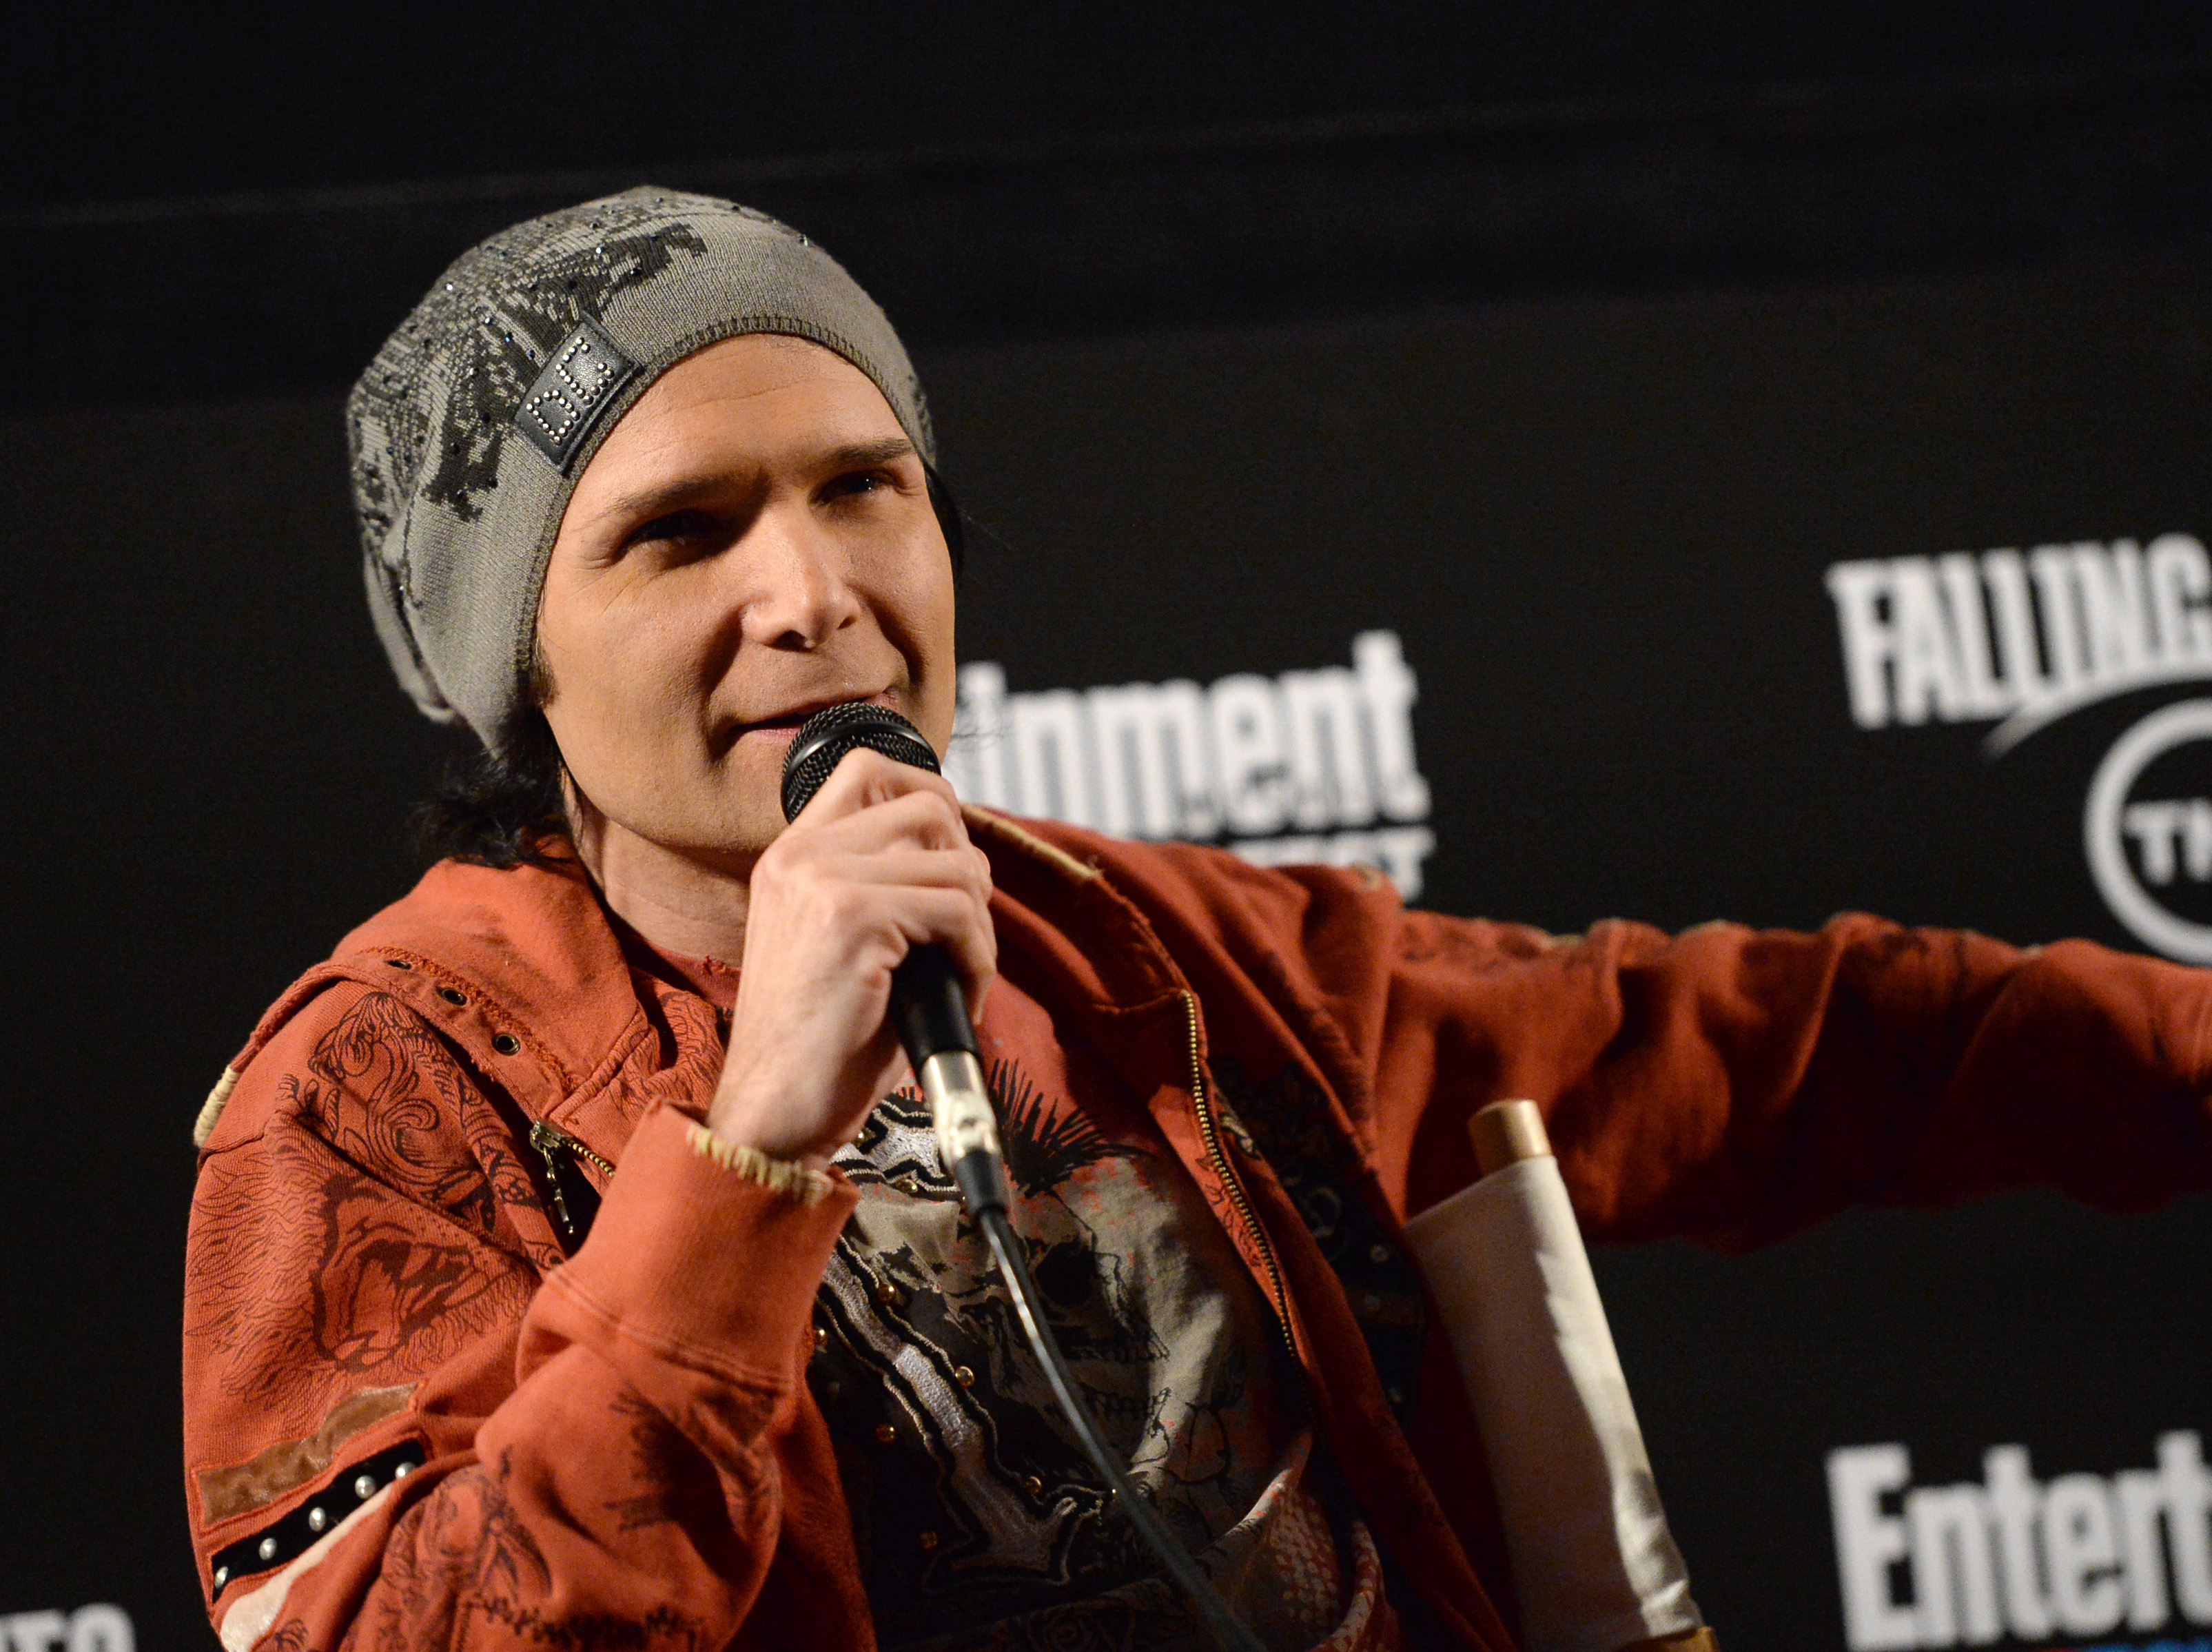 Corey Feldman names two of his alleged sexual abusers CBS News